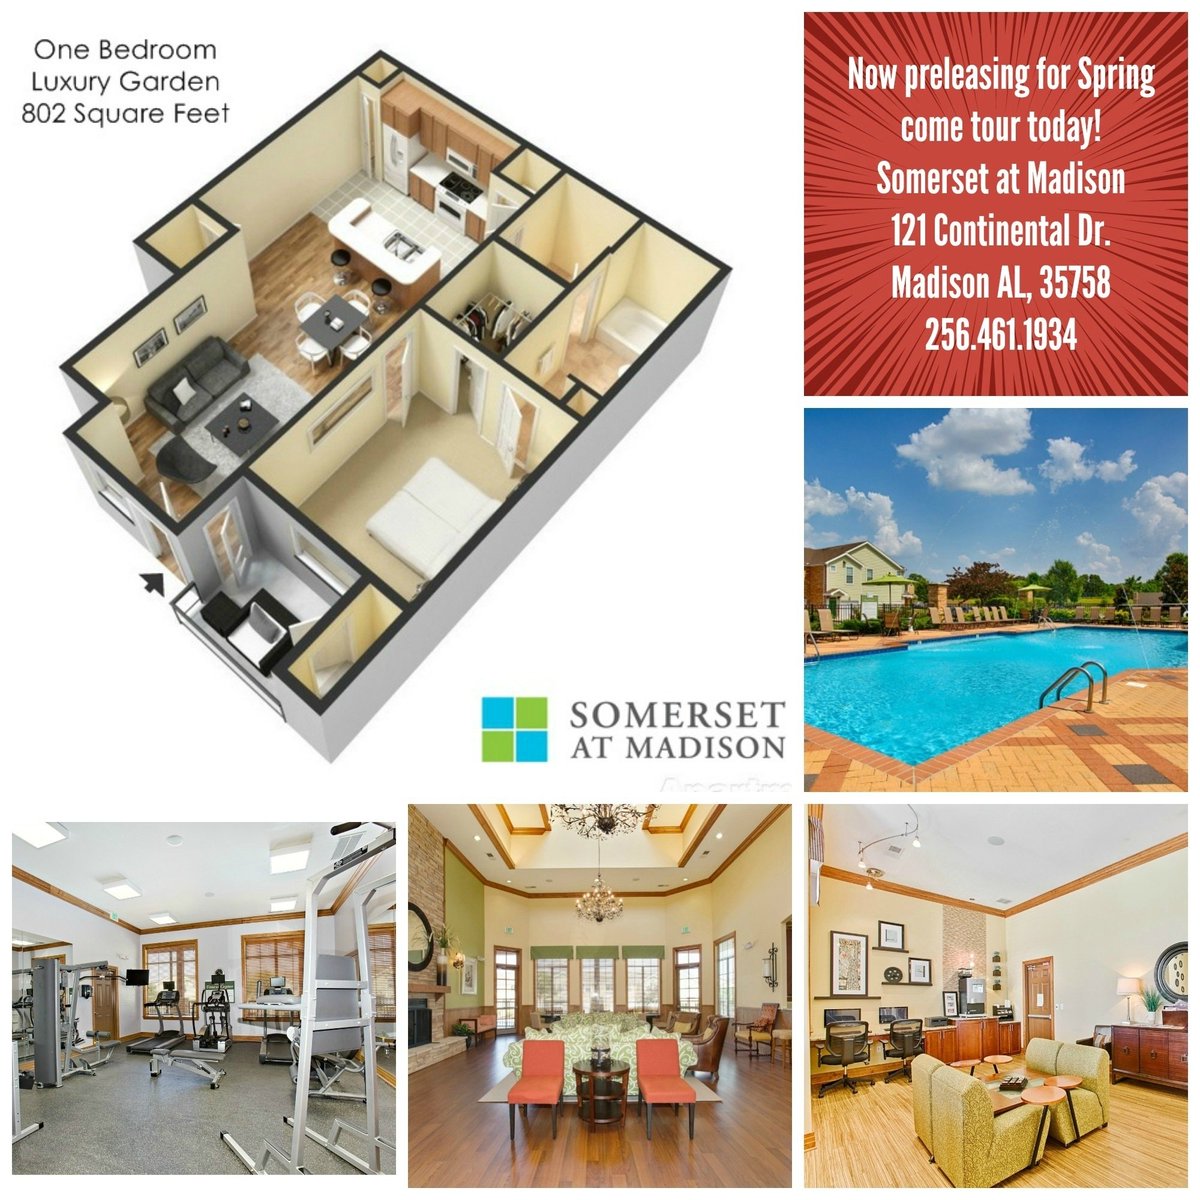 We're now preleasing for Spring! Stop by and see us today! #somersetatmadison #happywednesday